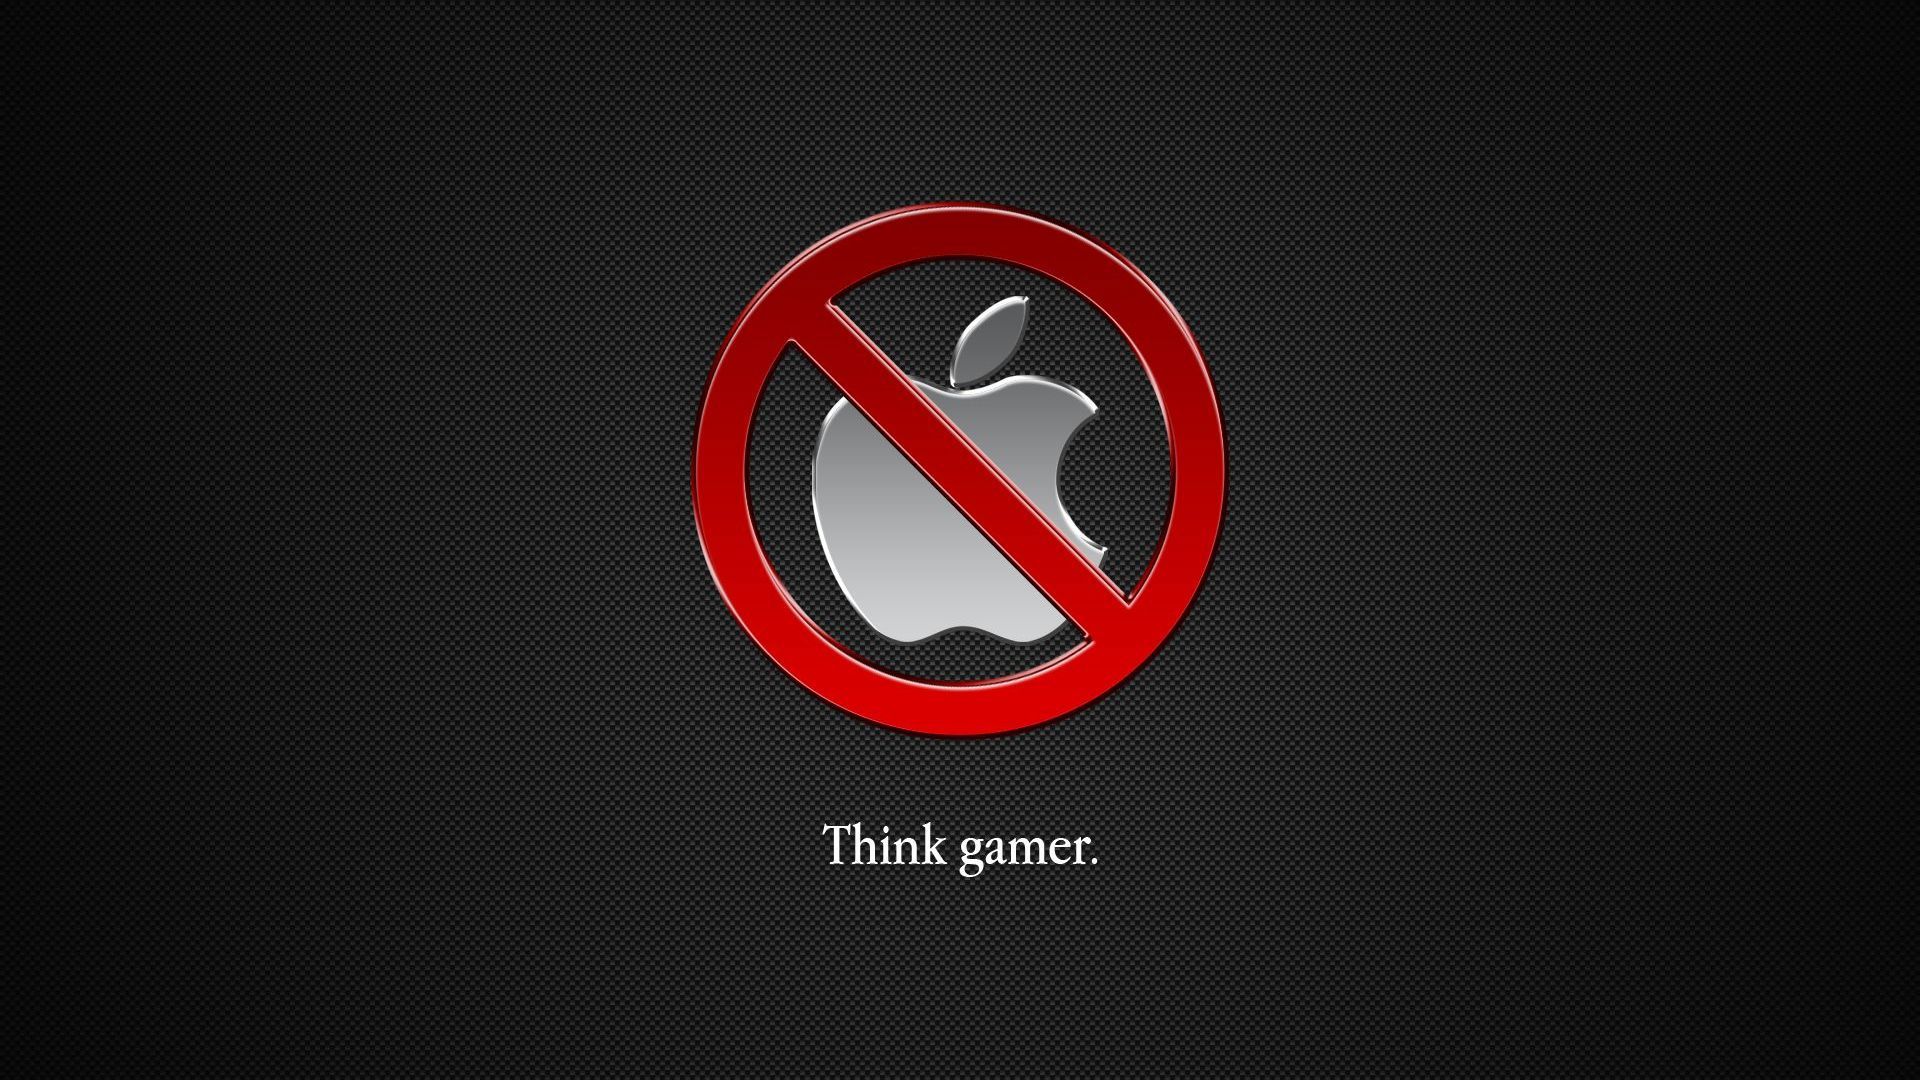 Think gamer, 1920x1080 Wallpaper and Free Stock Photo